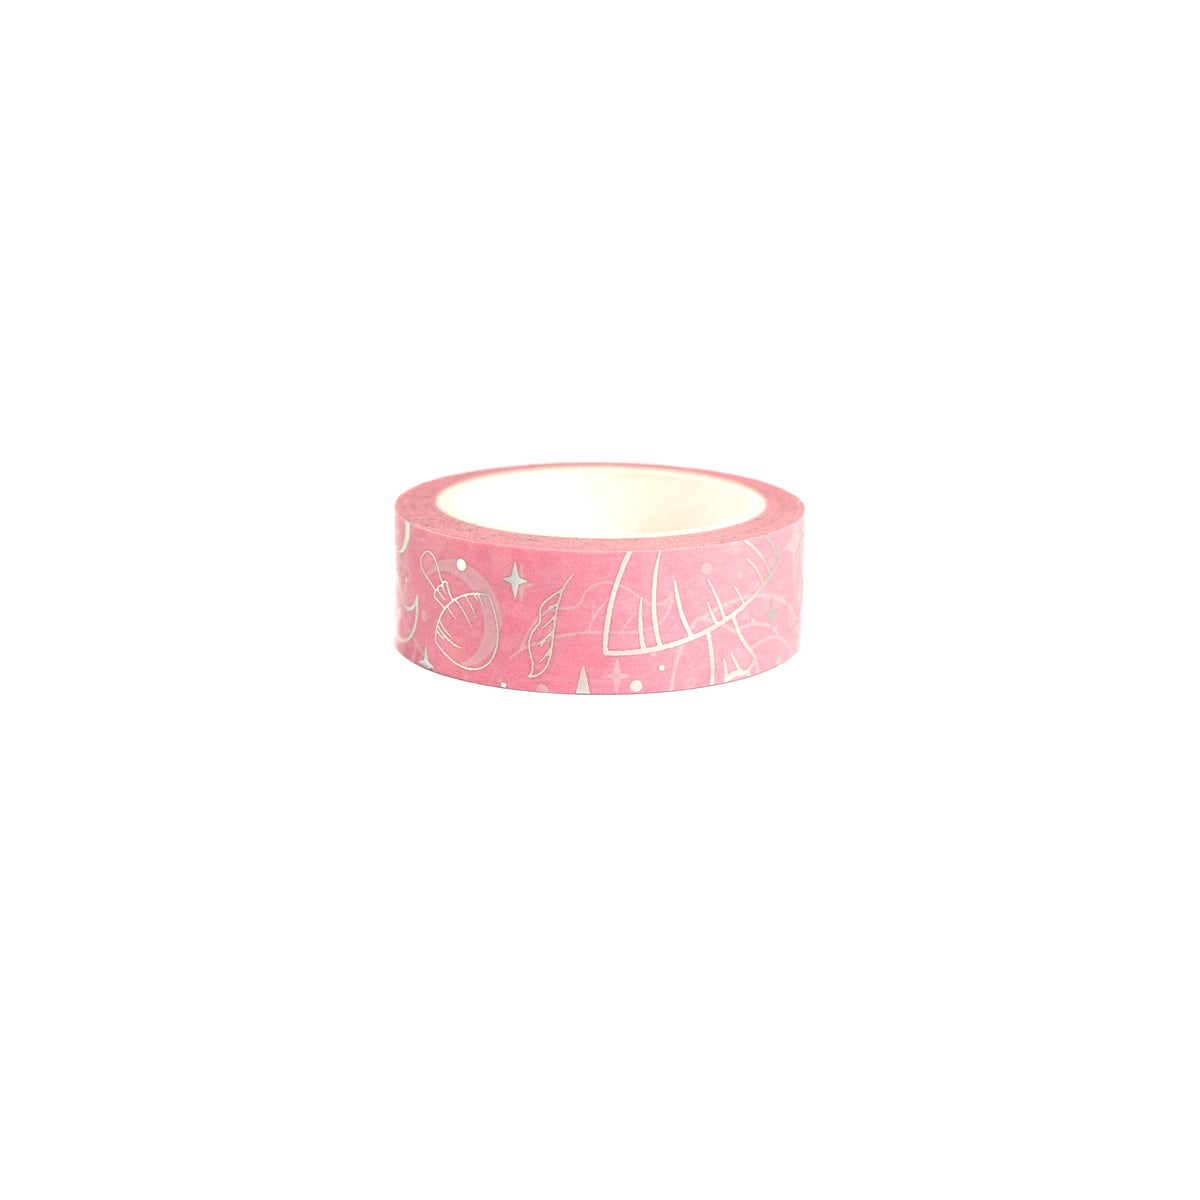 Witchy pink holographic washi tape